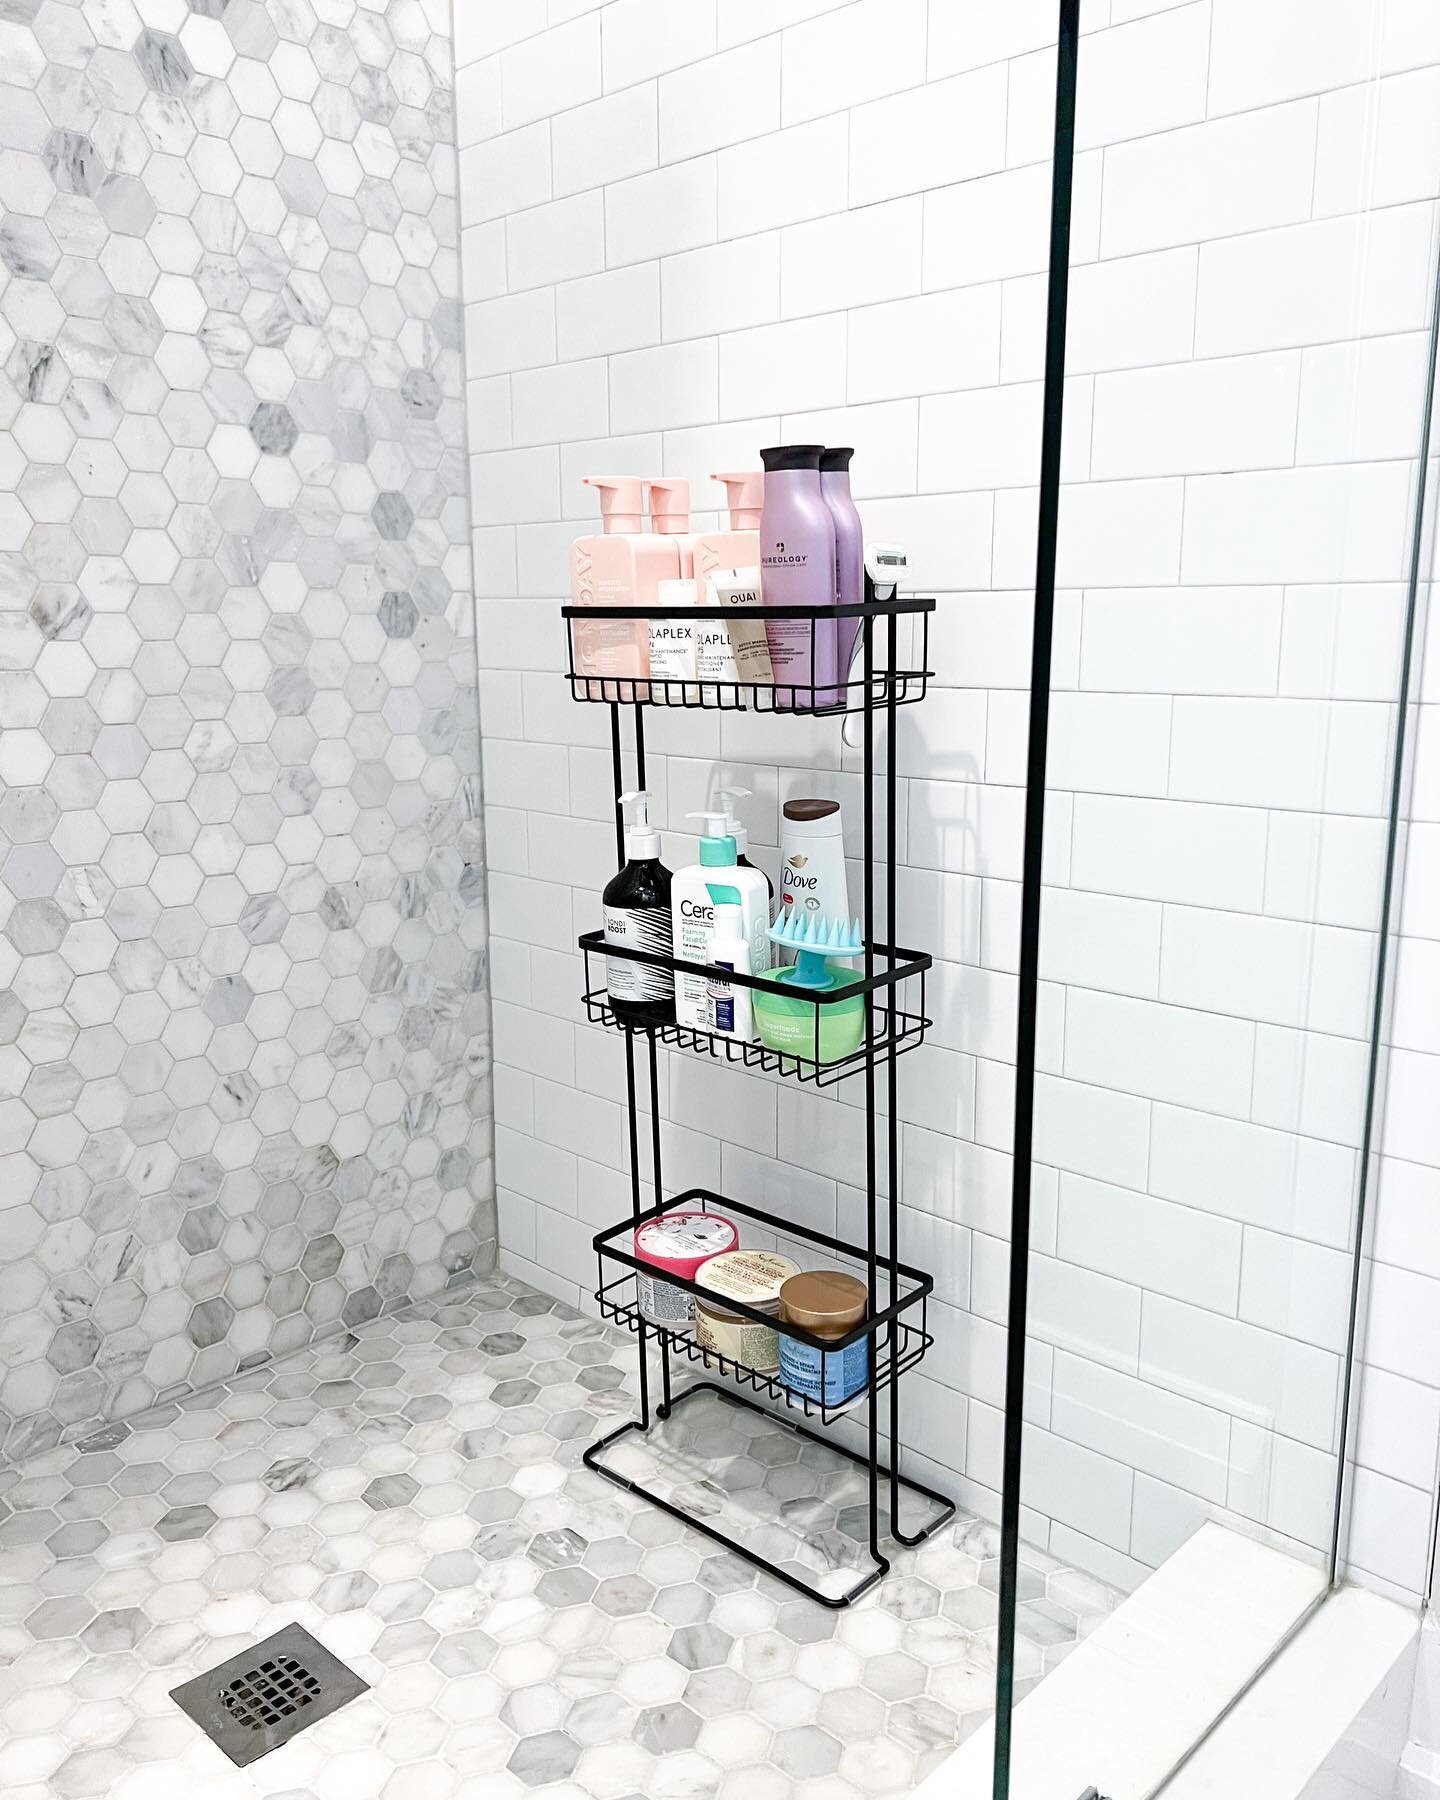 Is there anything better than a relaxing shower on a long weekend? 
⠀⠀⠀⠀⠀⠀⠀⠀⠀
Drop an emoji of something you're looking forward to this long weekend. I'll go first 🎢
⠀⠀⠀⠀⠀⠀⠀⠀⠀
#homeorganization #vaughanorganizer #torontoorganizer #professionalorgani